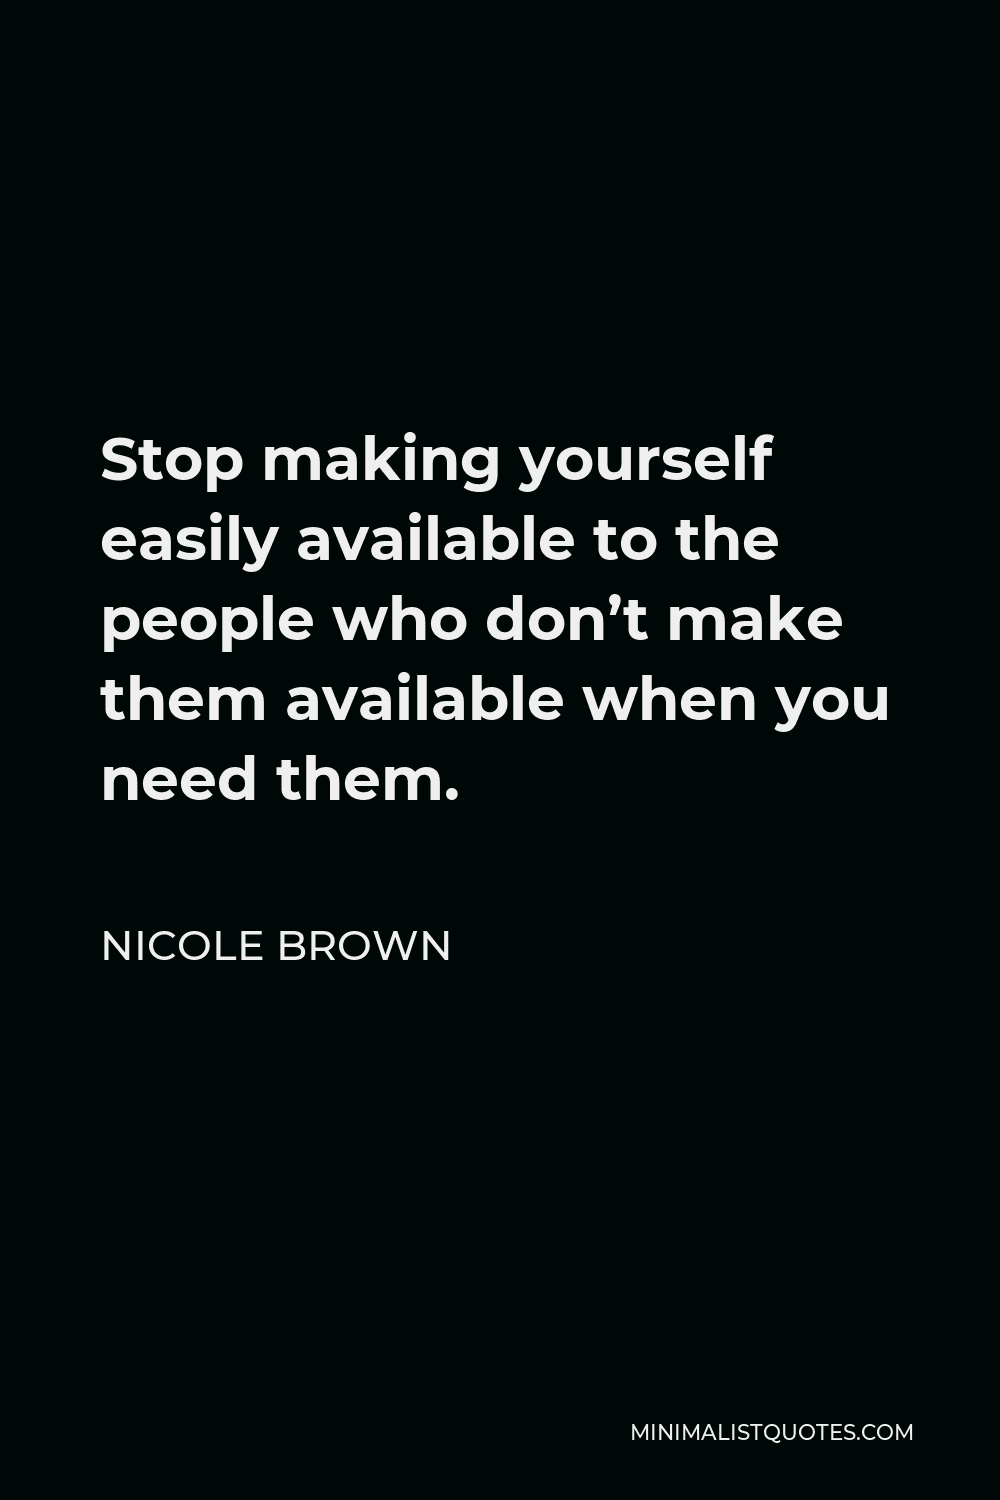 Nicole Brown Quote - Stop making yourself easily available to the people who don’t make them available when you need them.